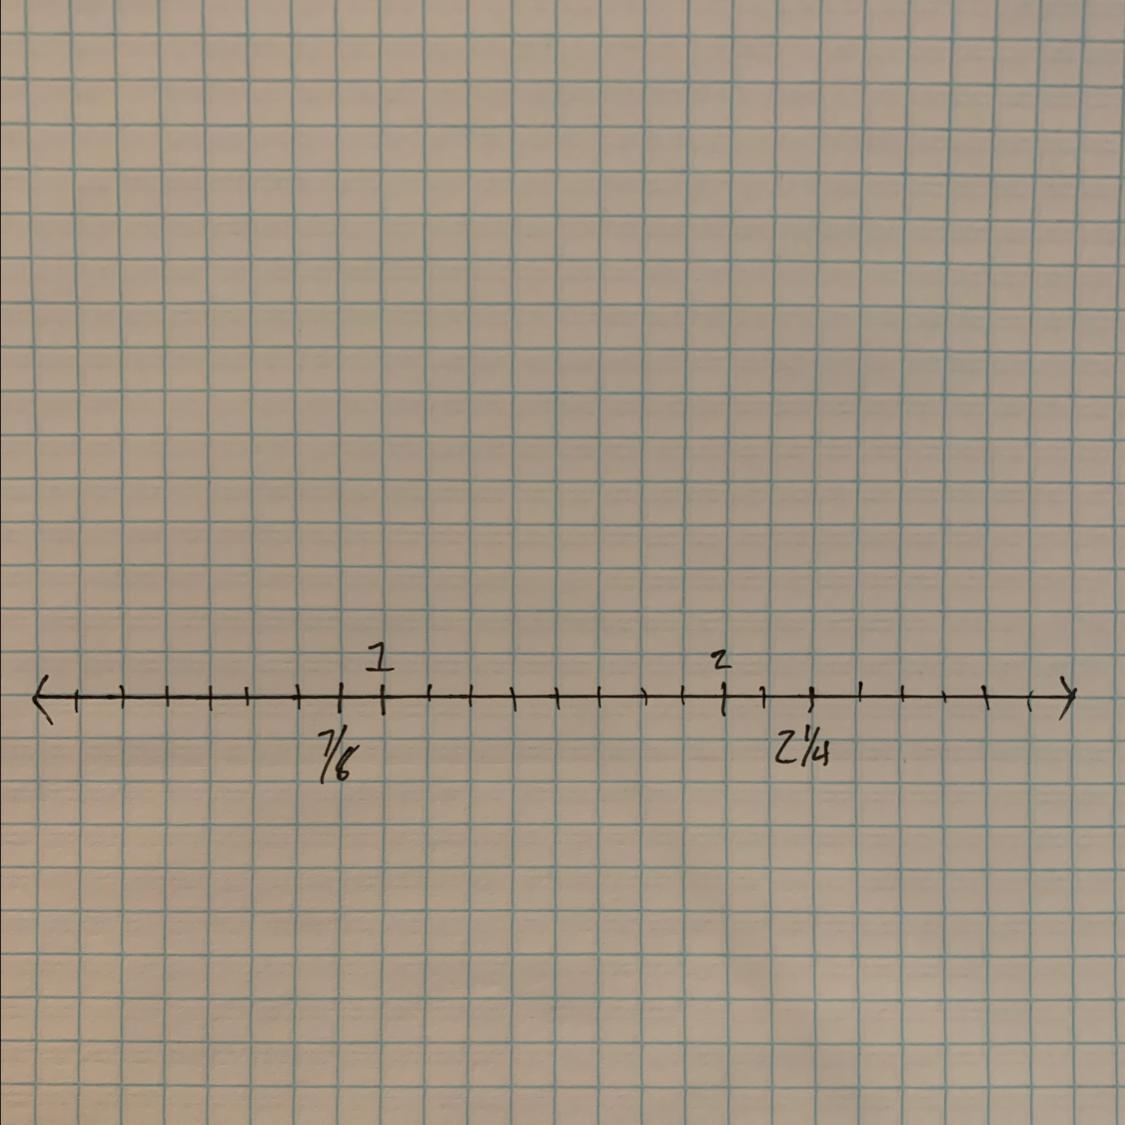 Plot 7/8 And 2 1/4 On A Number Line